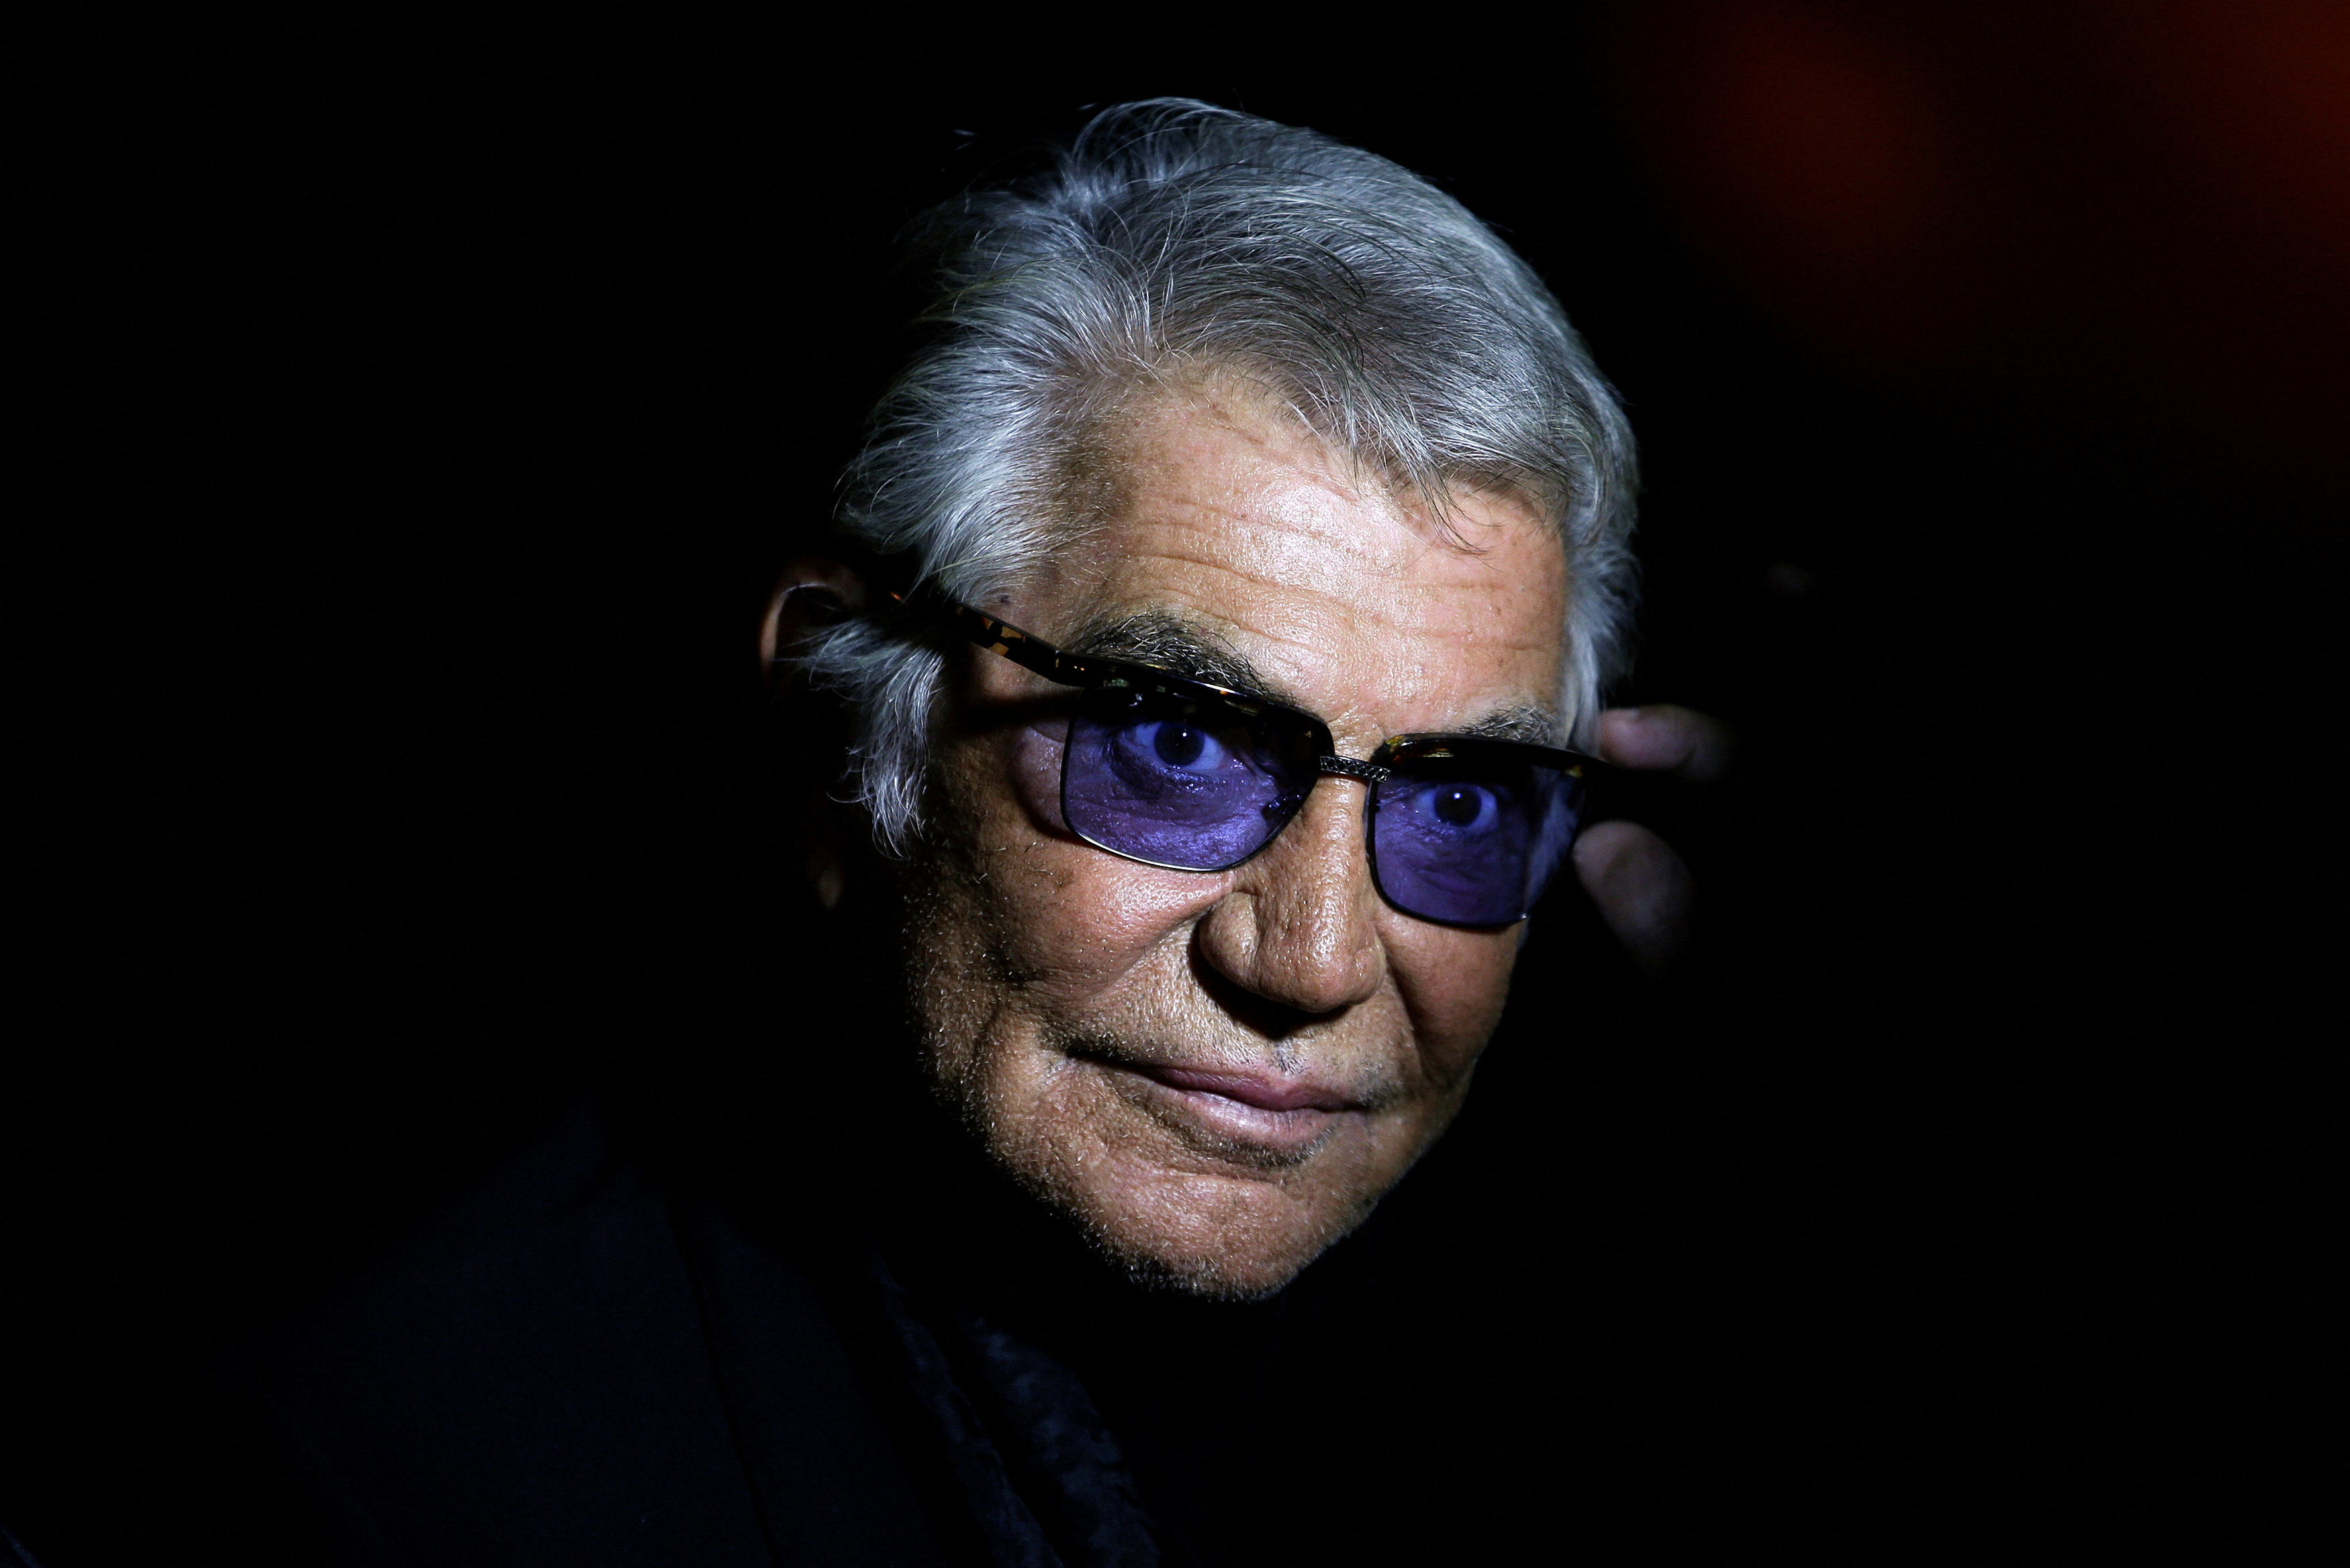 Cavalli poses before the start of his Spring/Summer 2014 collection during Milan Fashion Week